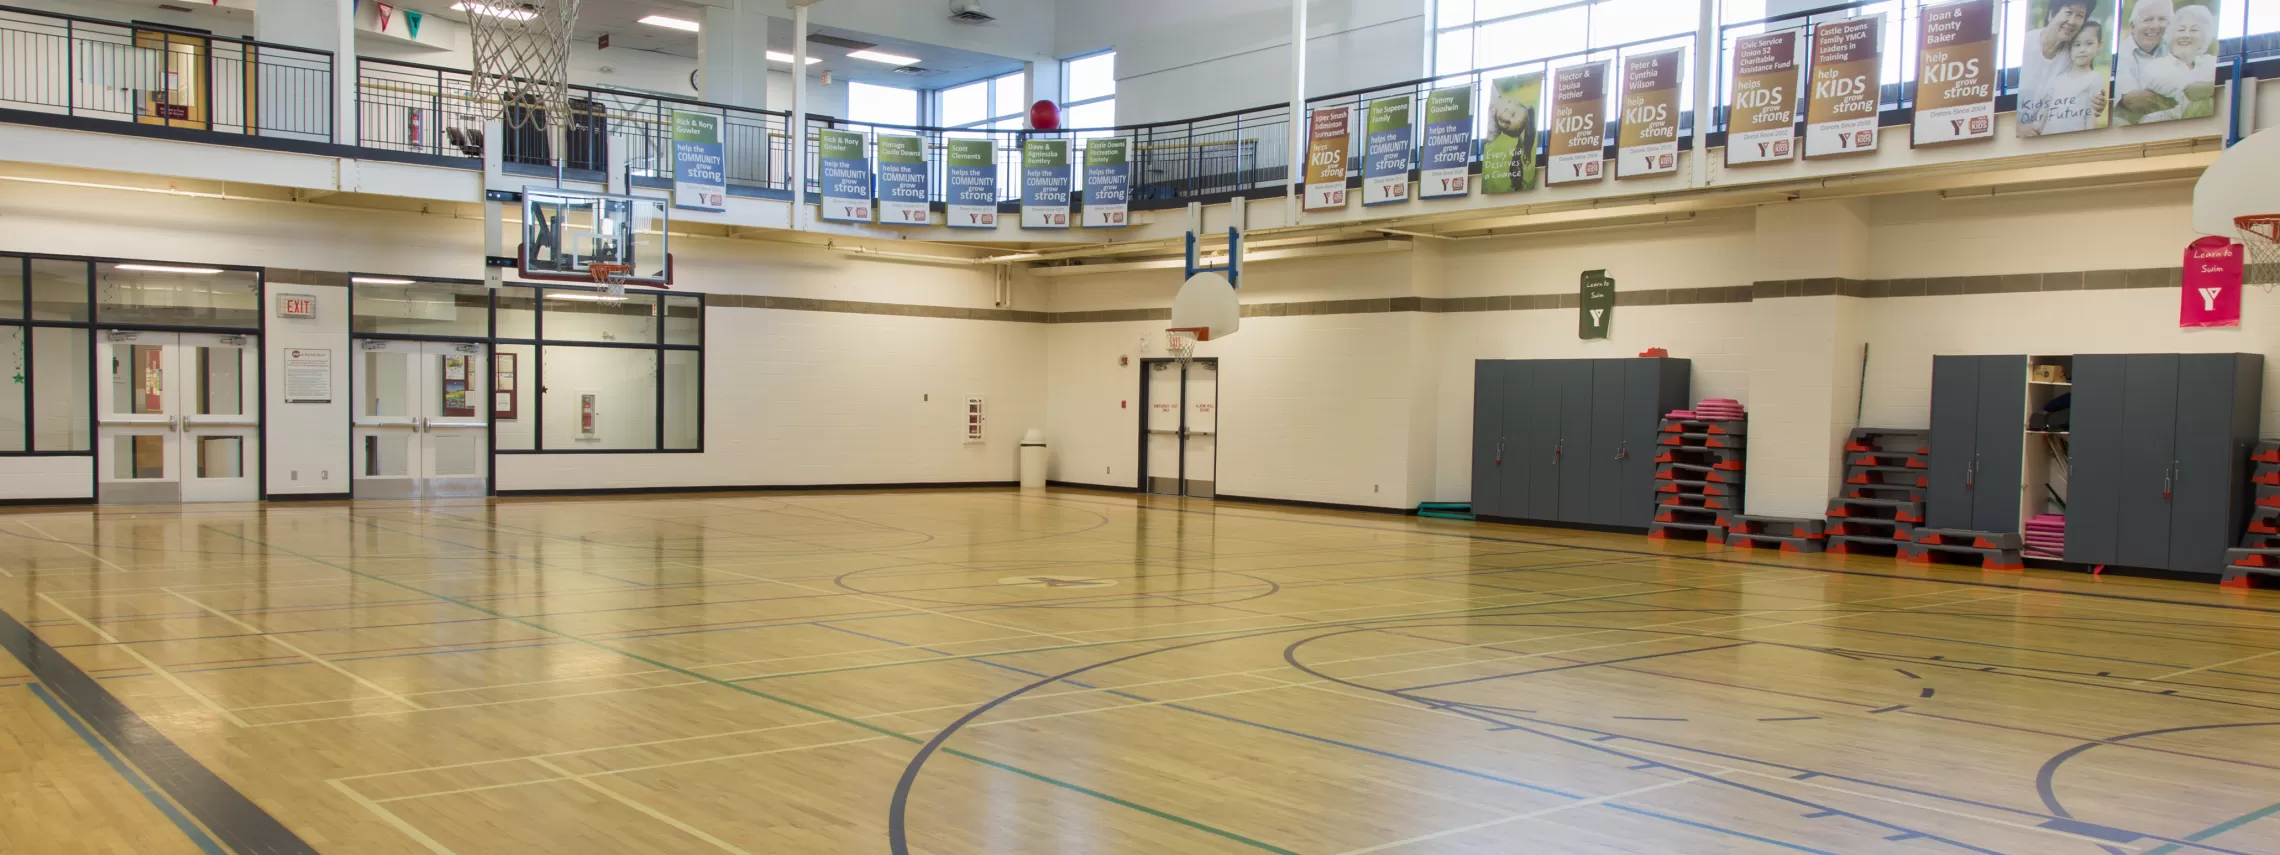 A large gymnasium featuring wood flooring and plently of light shining through second-story windows.